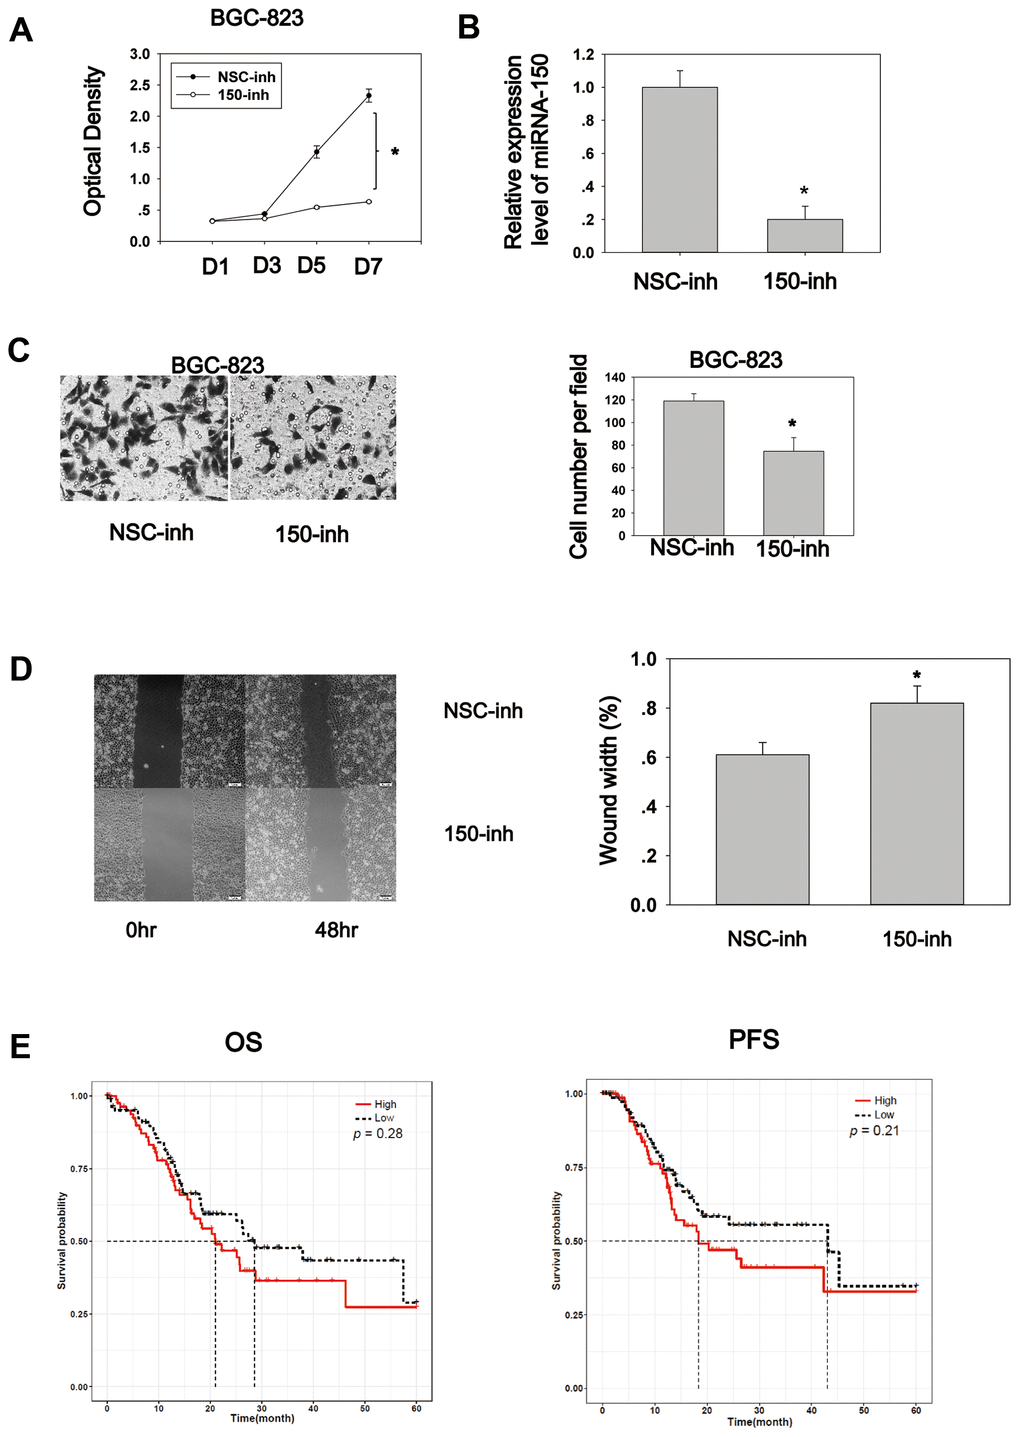 MiRNA-150 plays an oncogenic role in GC in vitro. (A) MiRNA-150 enhanced cell proliferation. Cell proliferation was determined in BGC-823 cells using a CCK8 assay. (B) The expression level of miRNA-150 in BGC-823 cells decreased successfully after transfection with miRNA-150 inhibitors. (C) MiRNA-150 boosted cell migration. The migratory ability of BGC-823 cells was assessed using a Transwell assay. Five fields in each well were randomly chosen to measure migration. The experiment was repeated three times. (D) MiRNA-150 inhibition impaired the migration ability of BGC-823 cells. Five fields in each wound were randomly chosen to measure migration. The experiment was repeated three times. (E) Overall survival (OS) and progression-free survival (PFS) in groups with high and low expression of miRNA-150 were analyzed using a Kaplan–Meier survival analysis of the ATGC data of patients with stage III and IV GC. *p